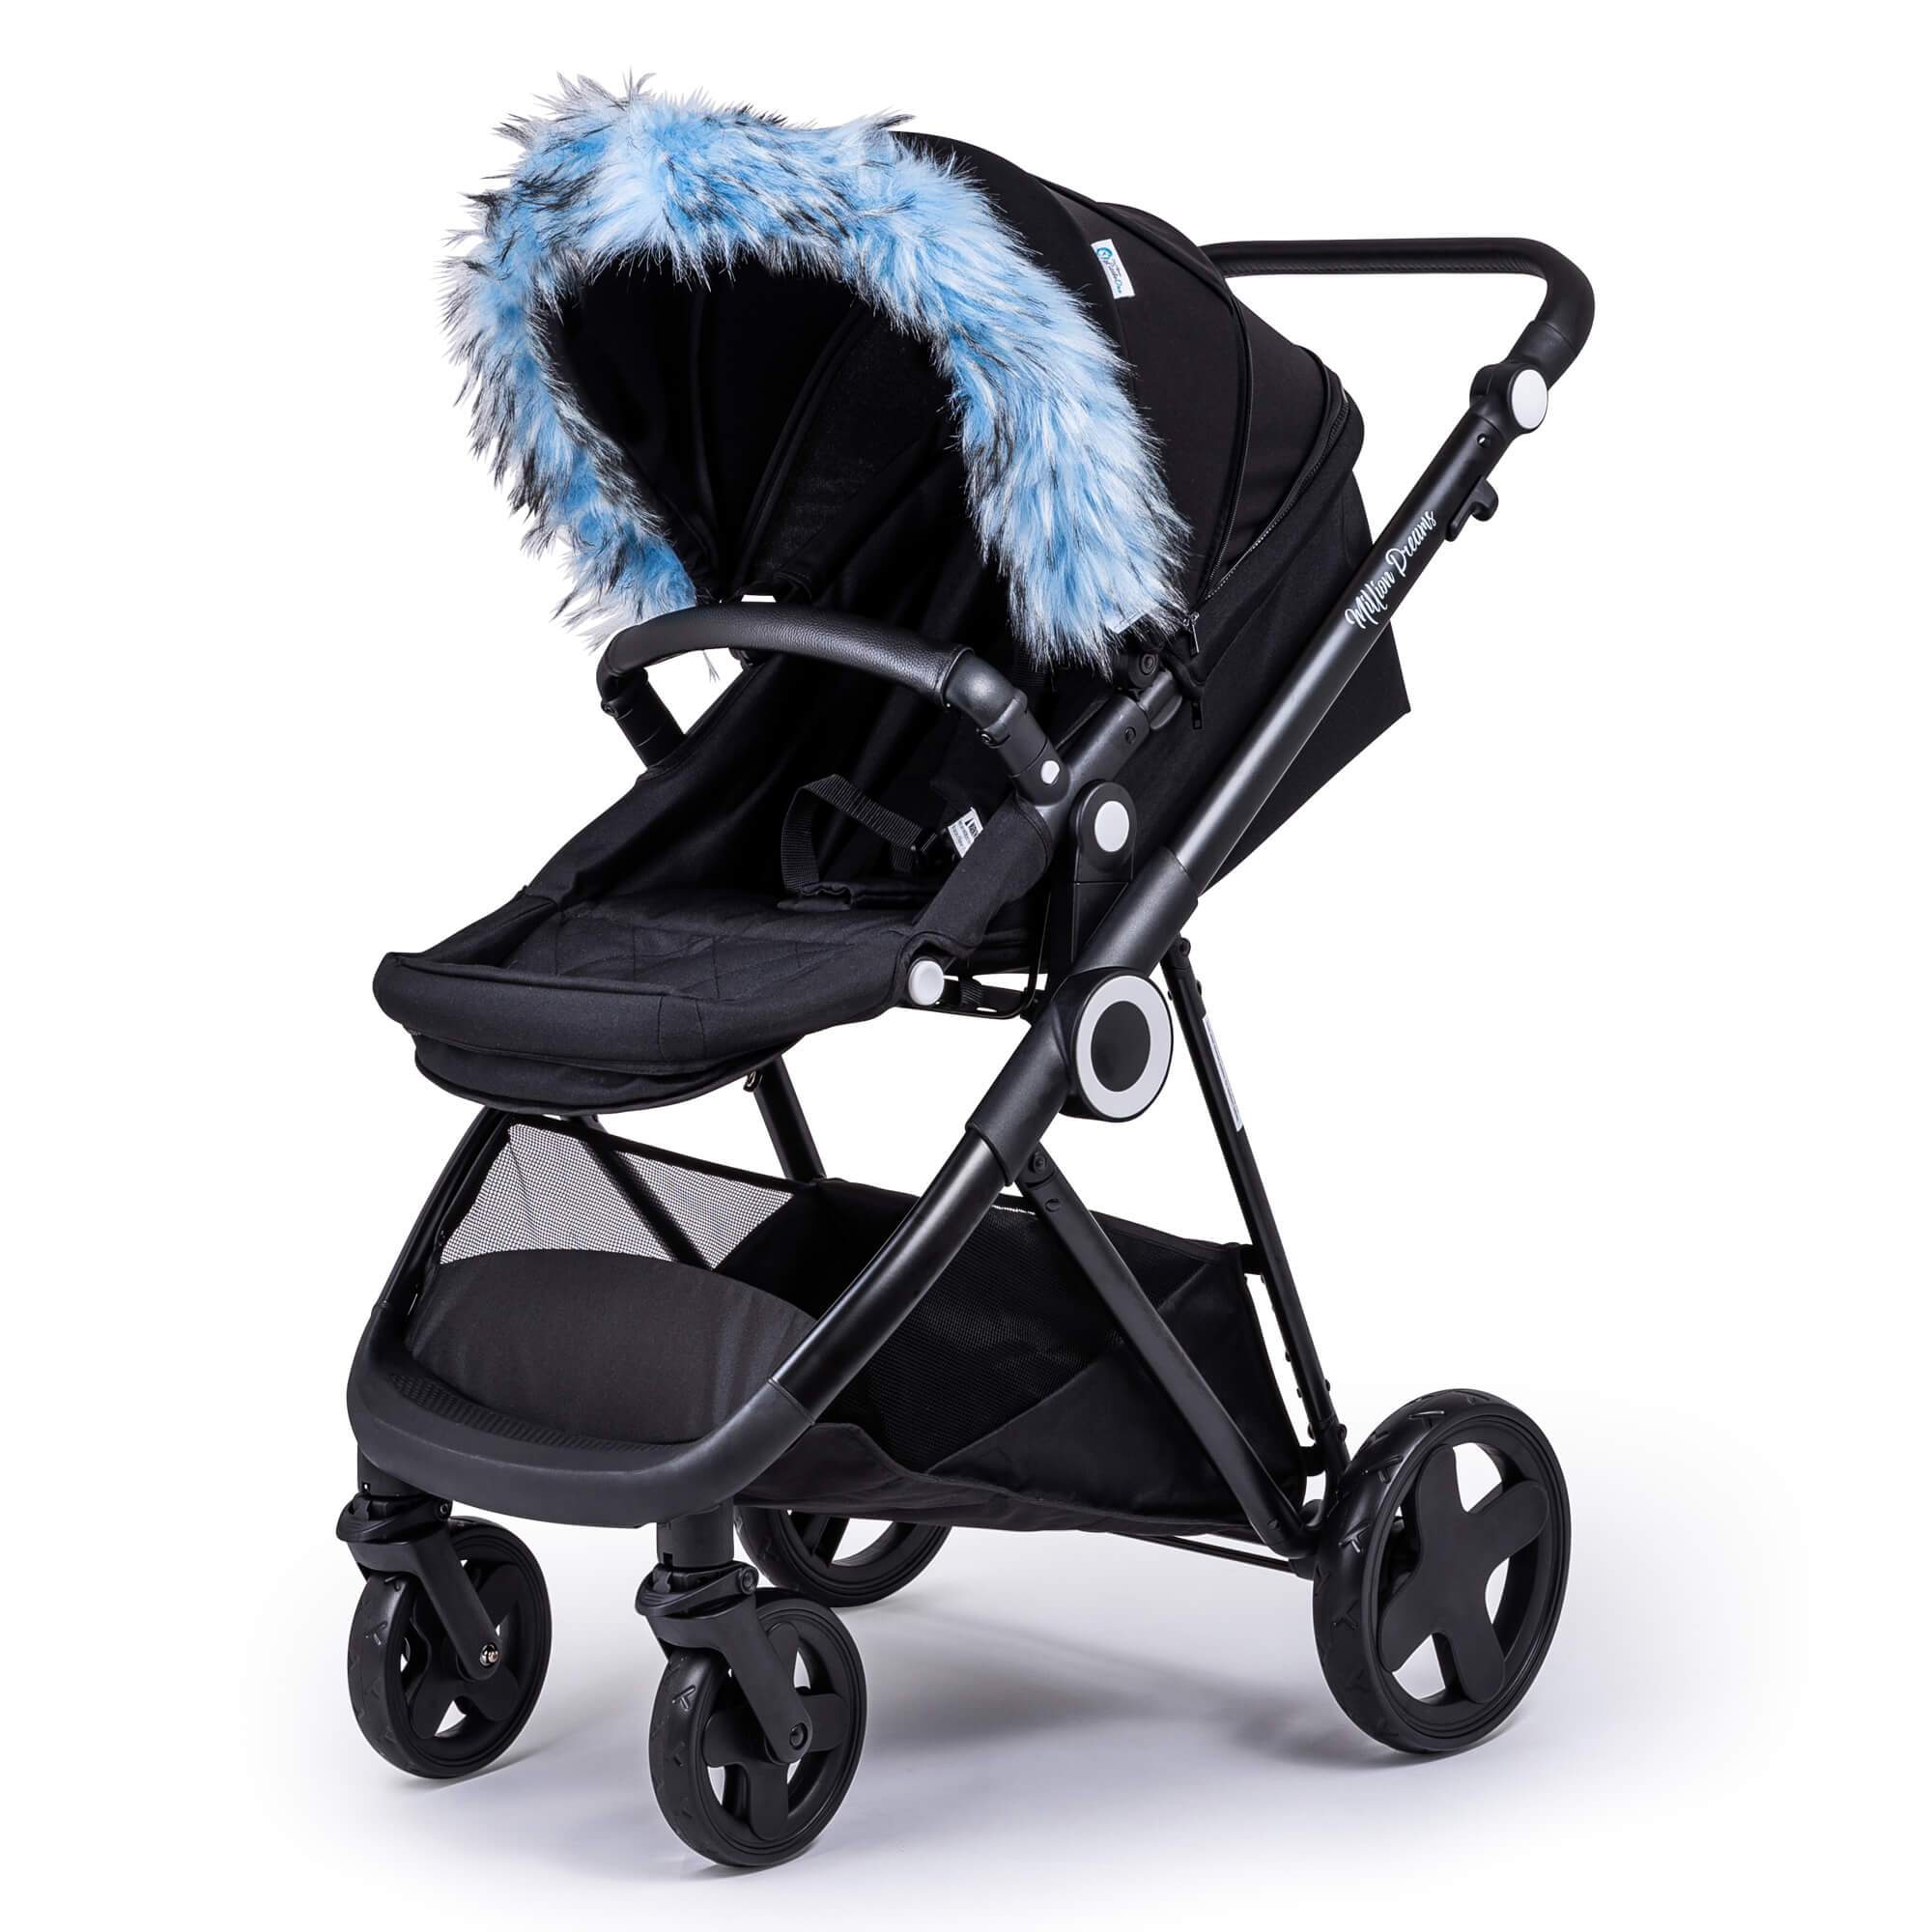 Pram Fur Hood Trim Attachment For Pushchair Compatible with Mee-Go - Light Blue / Fits All Models | For Your Little One